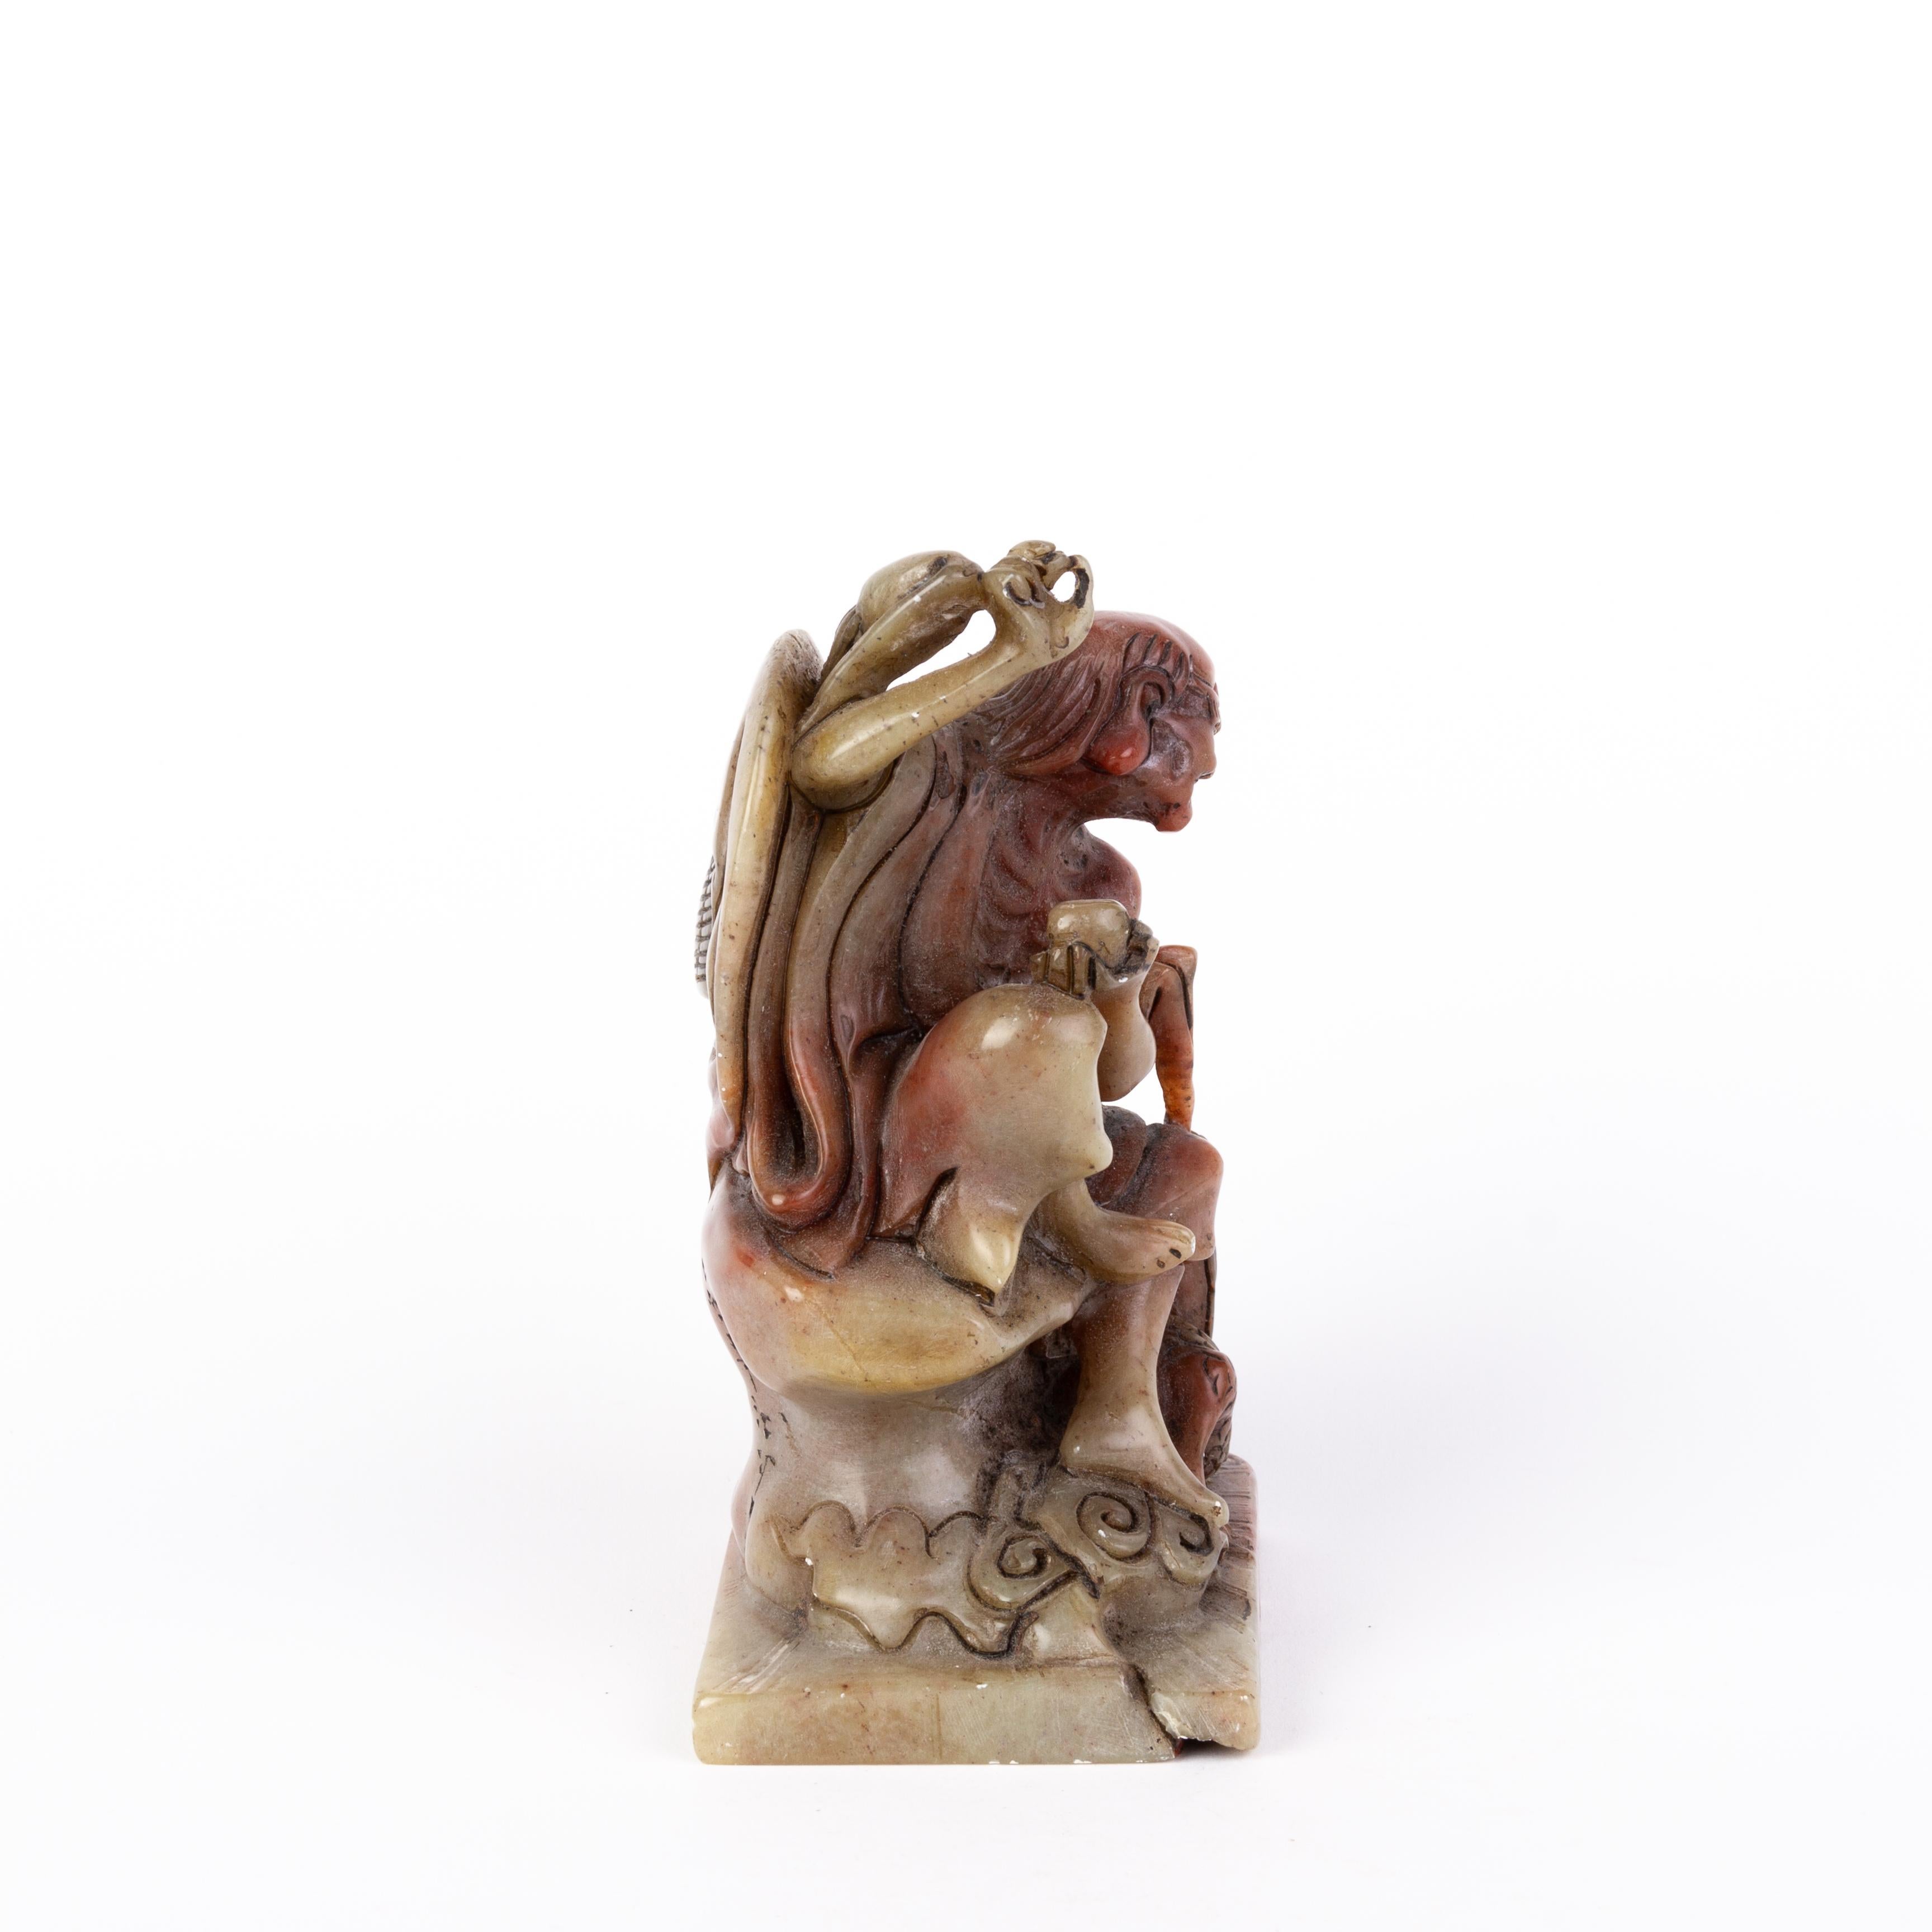 A finely carved Chinese soapstone carving sculpture seal.
Chinese Carved Soapstone Sculpture 19th Century Qing
1820 to 1880 China, Qing Dynasty.
Very good condition.
From a private collection.
Free international shipping.